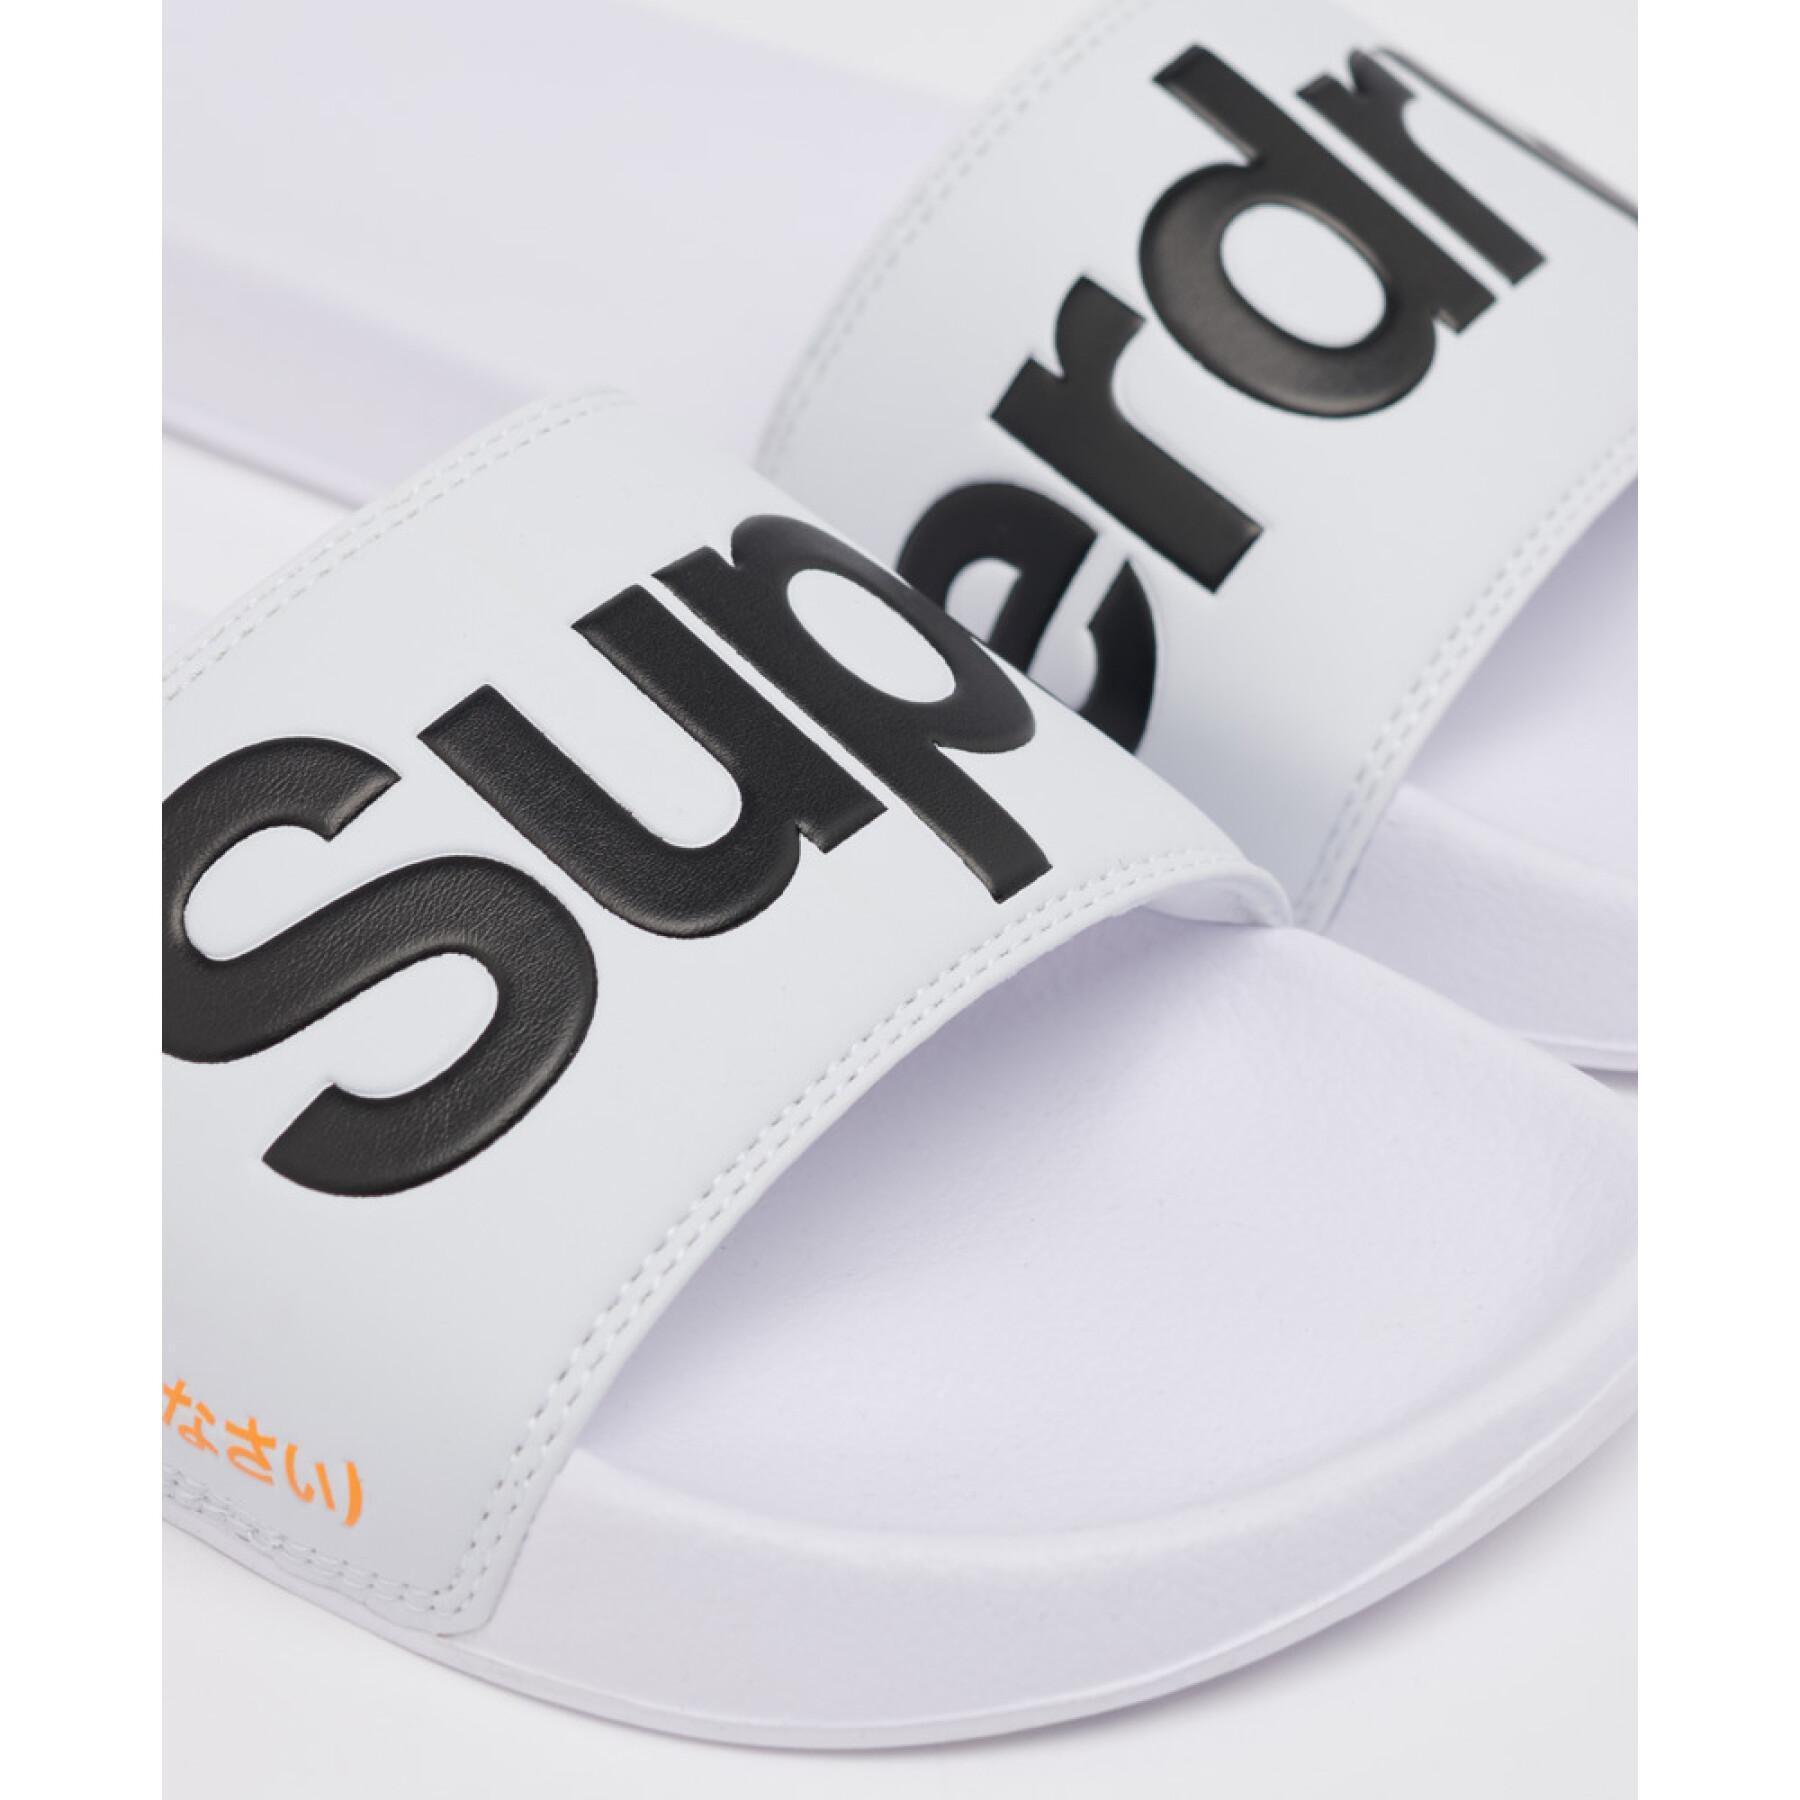 Tap shoes Superdry Classic